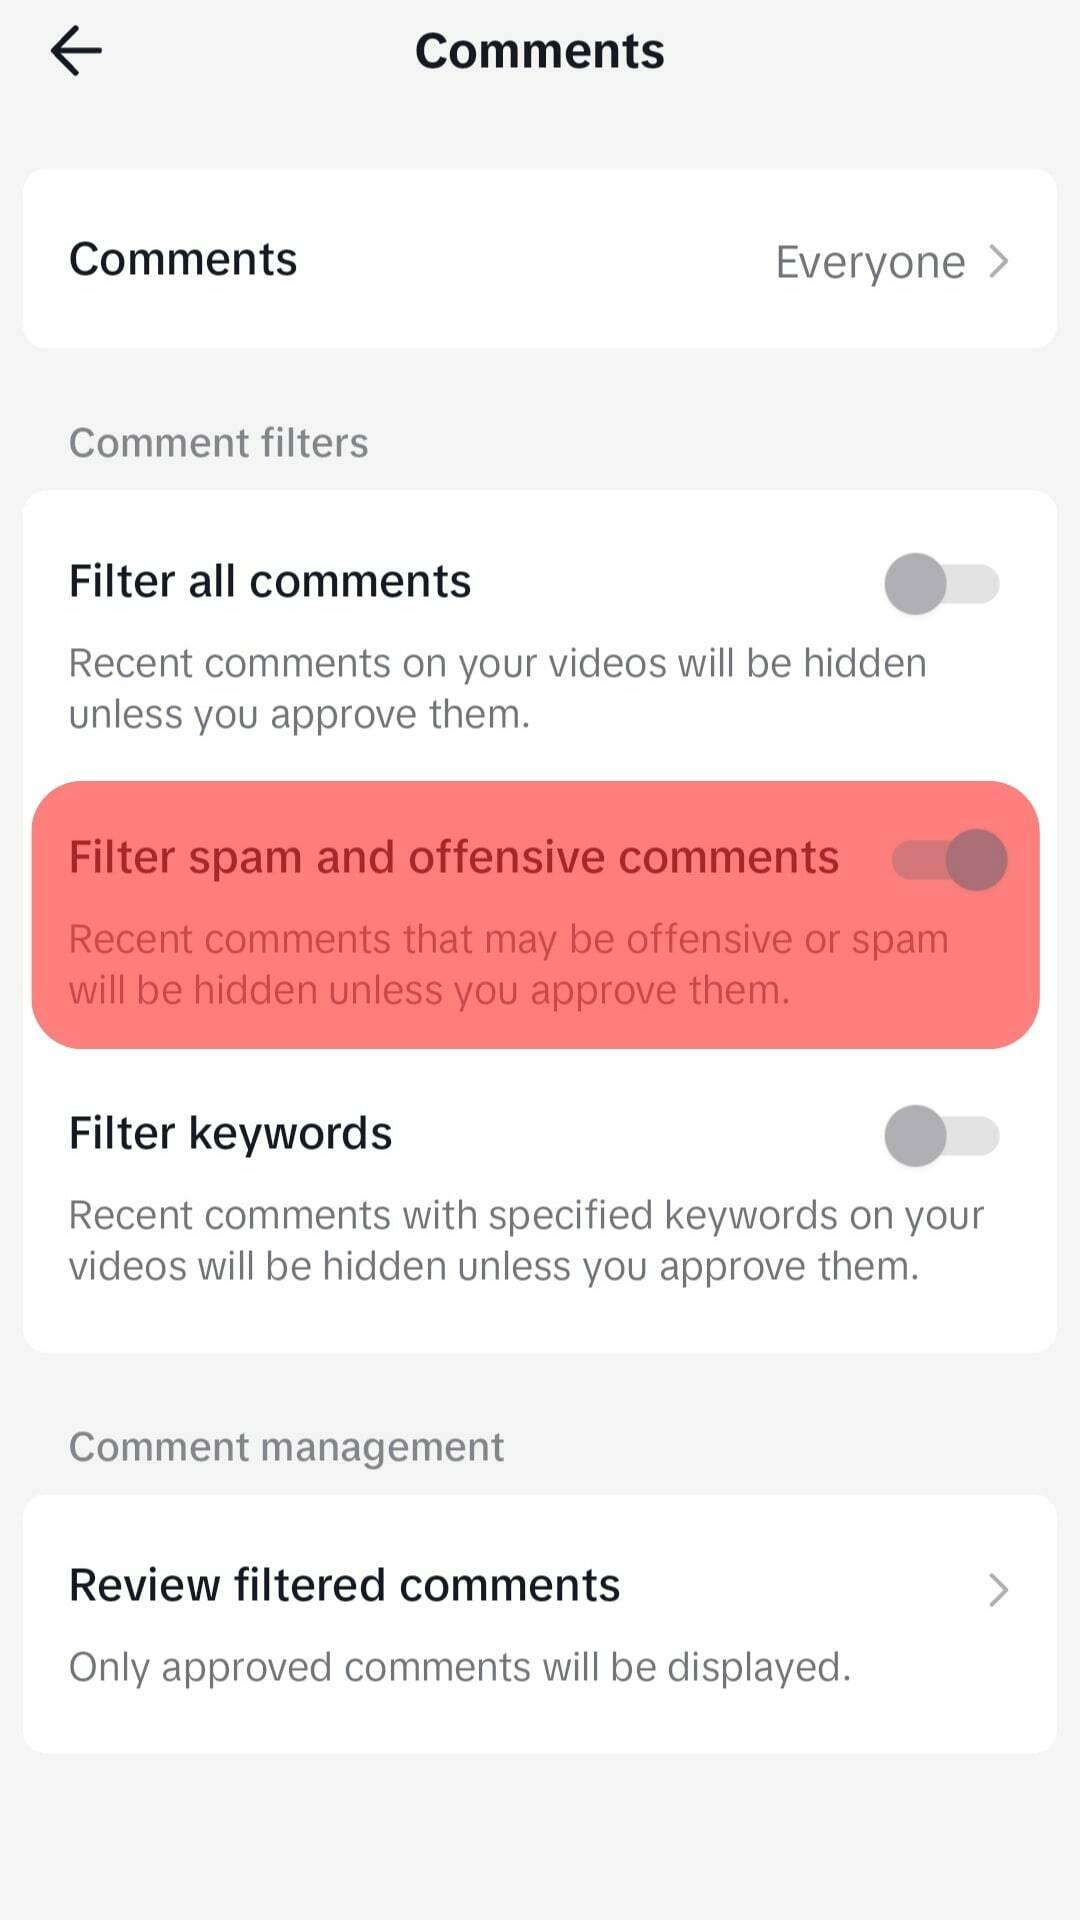 Filter Spam And Offensive Comments Option